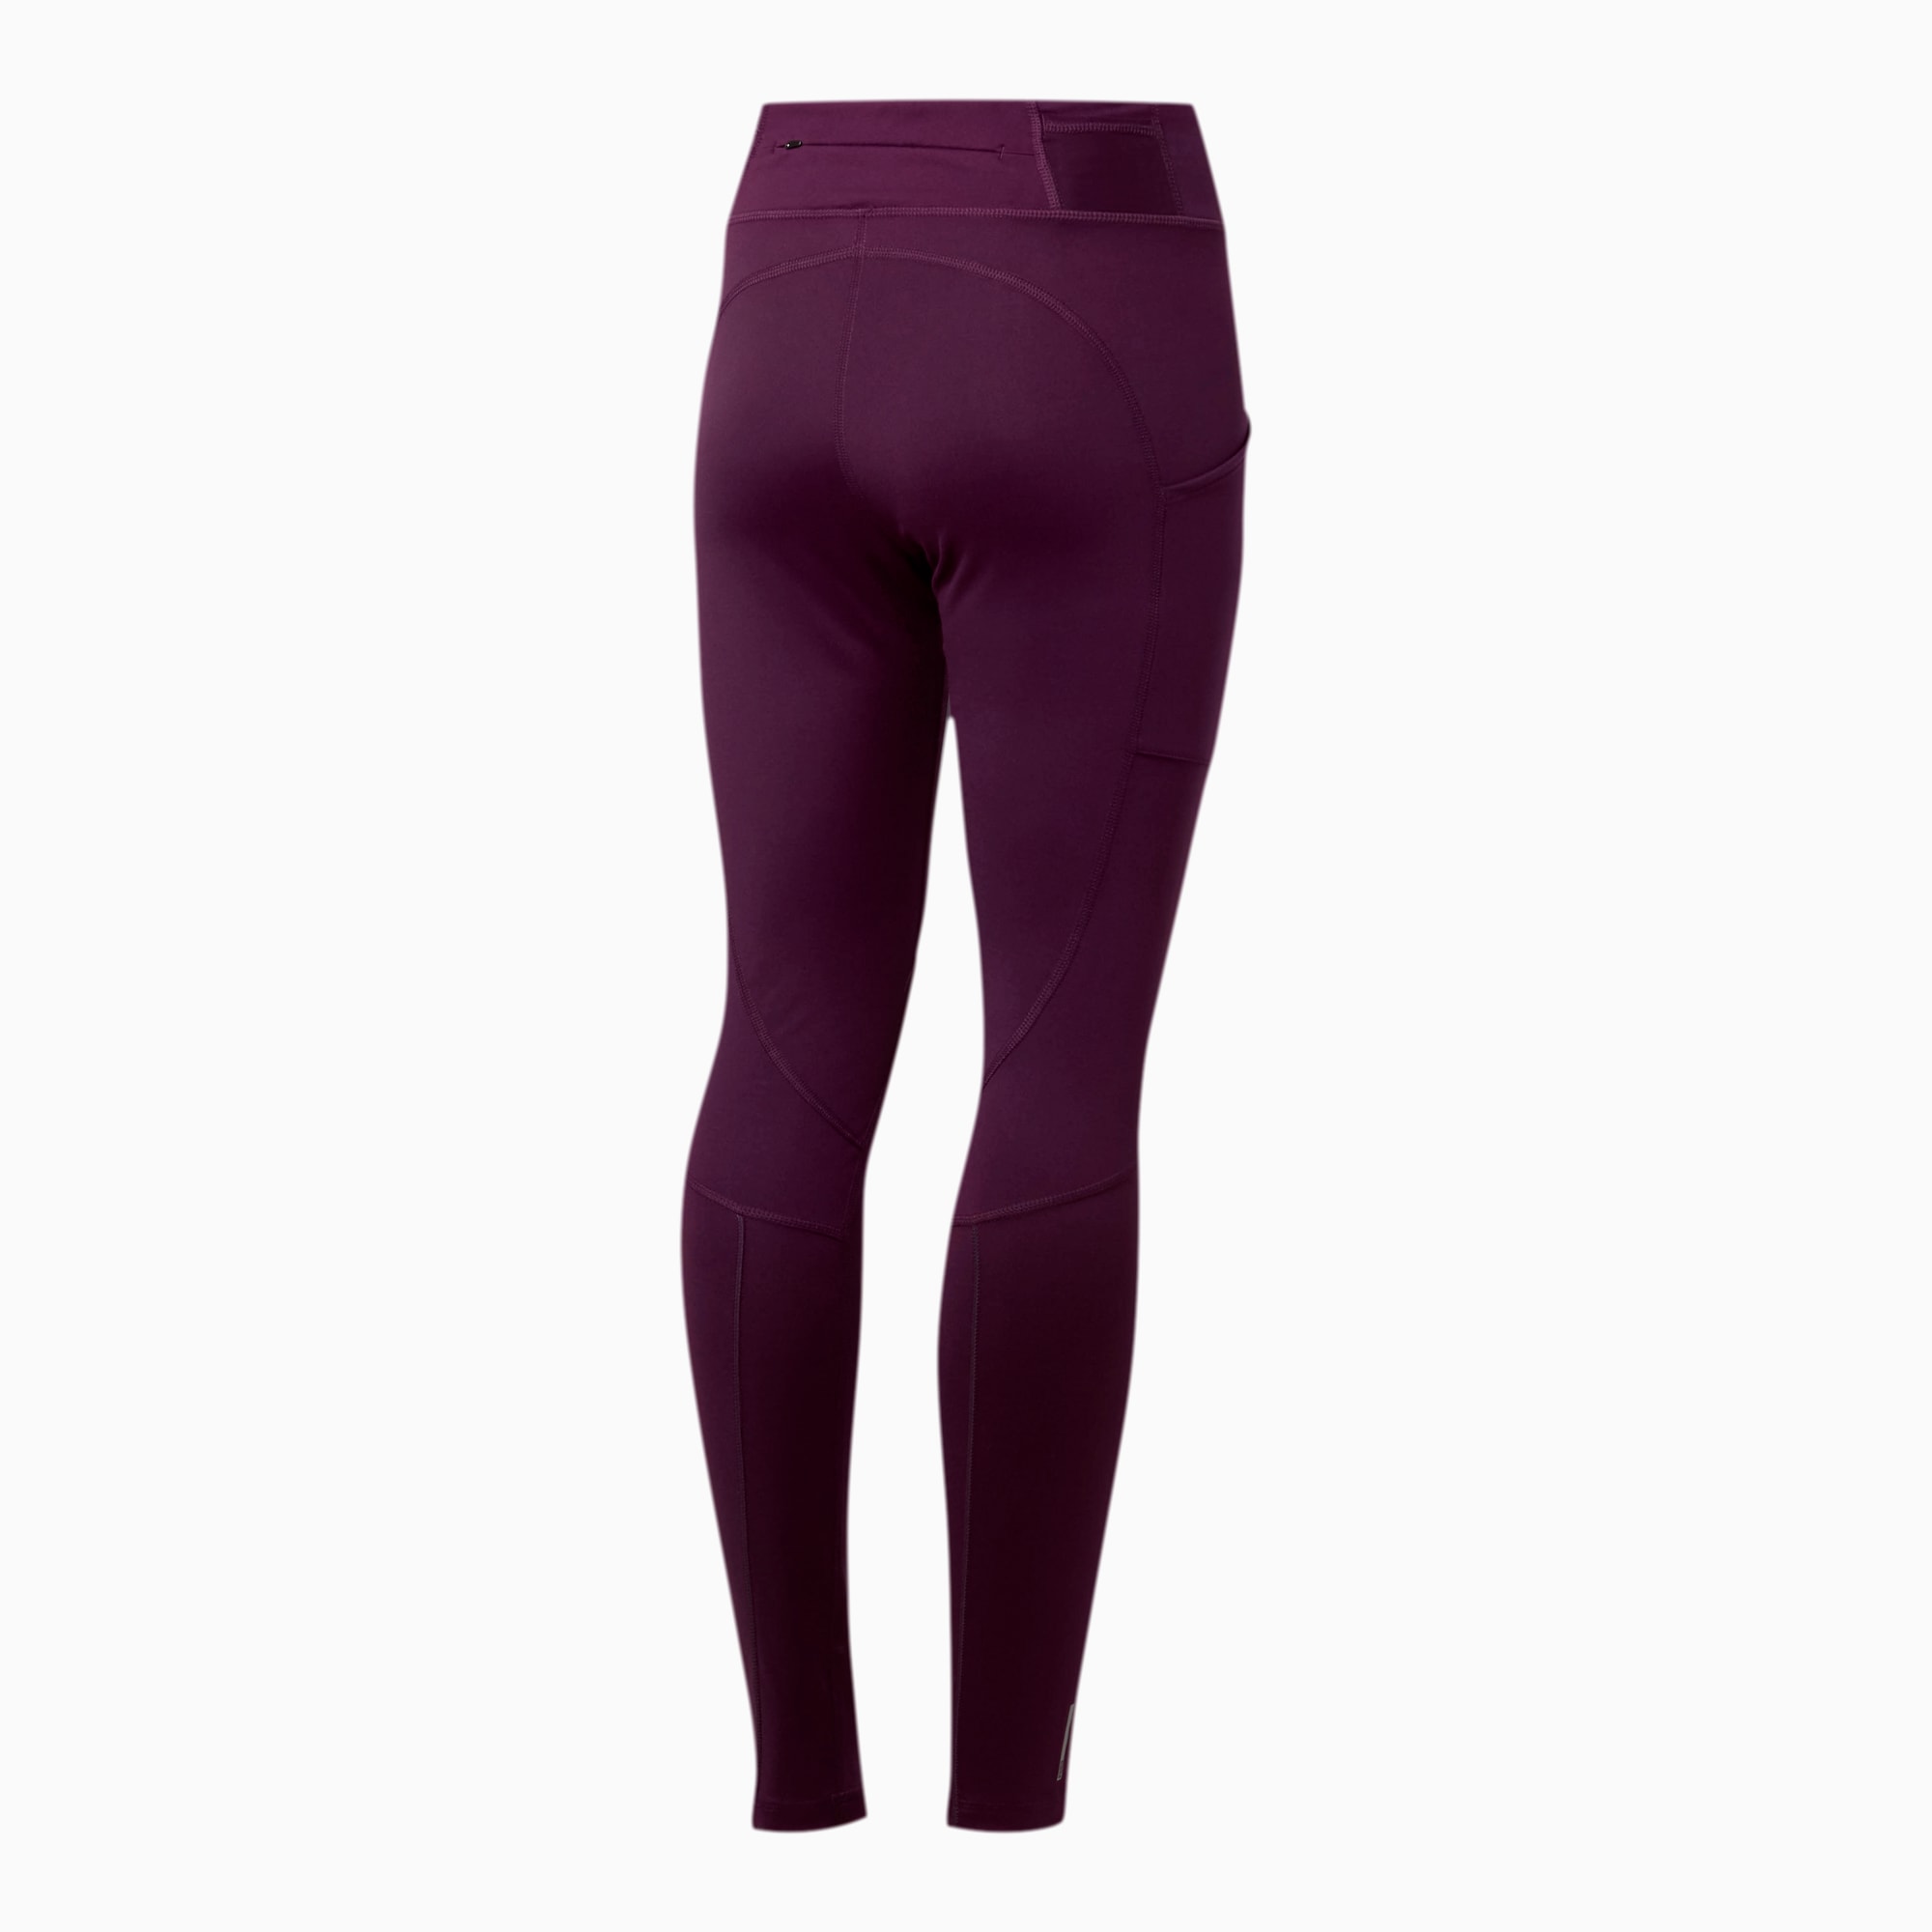 Puma Youth Fleece Lined Leggings, Pitter Patter Boutique Canada